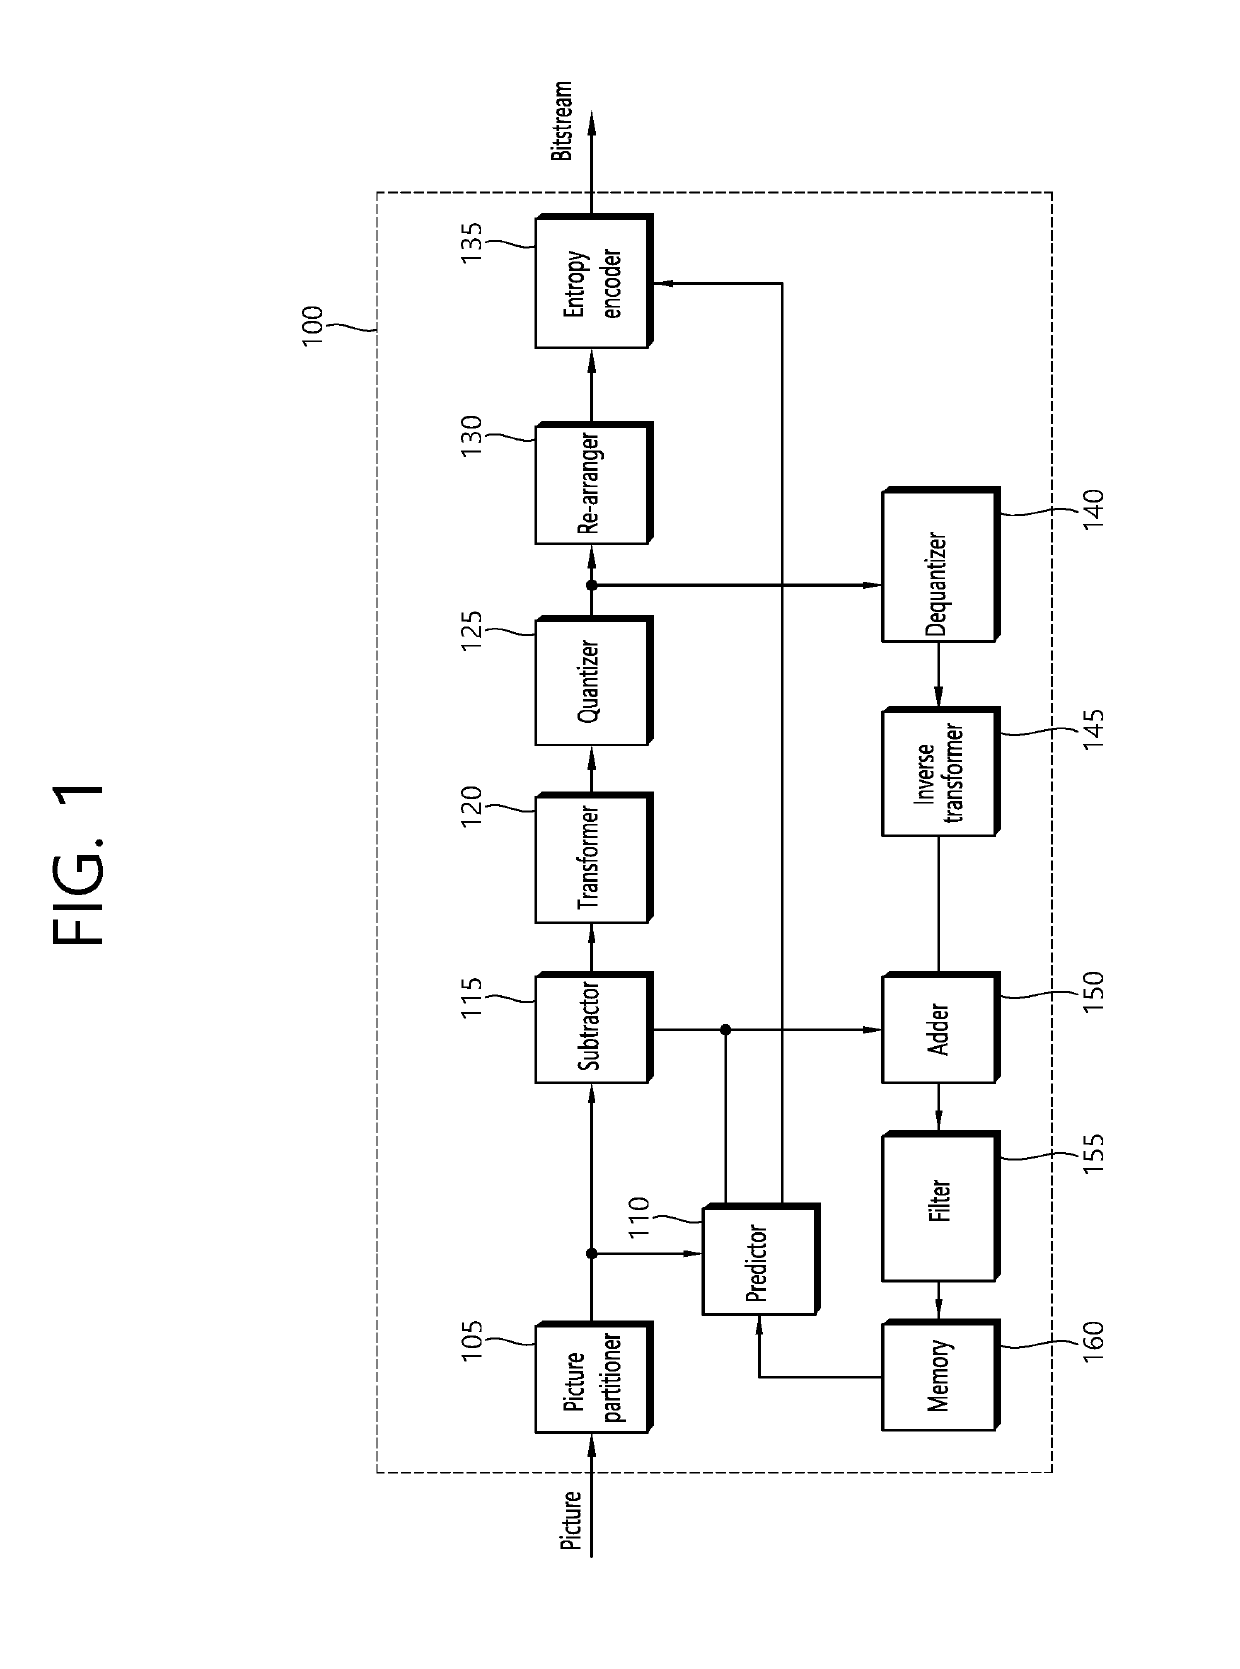 Image decoding method and device in image coding system